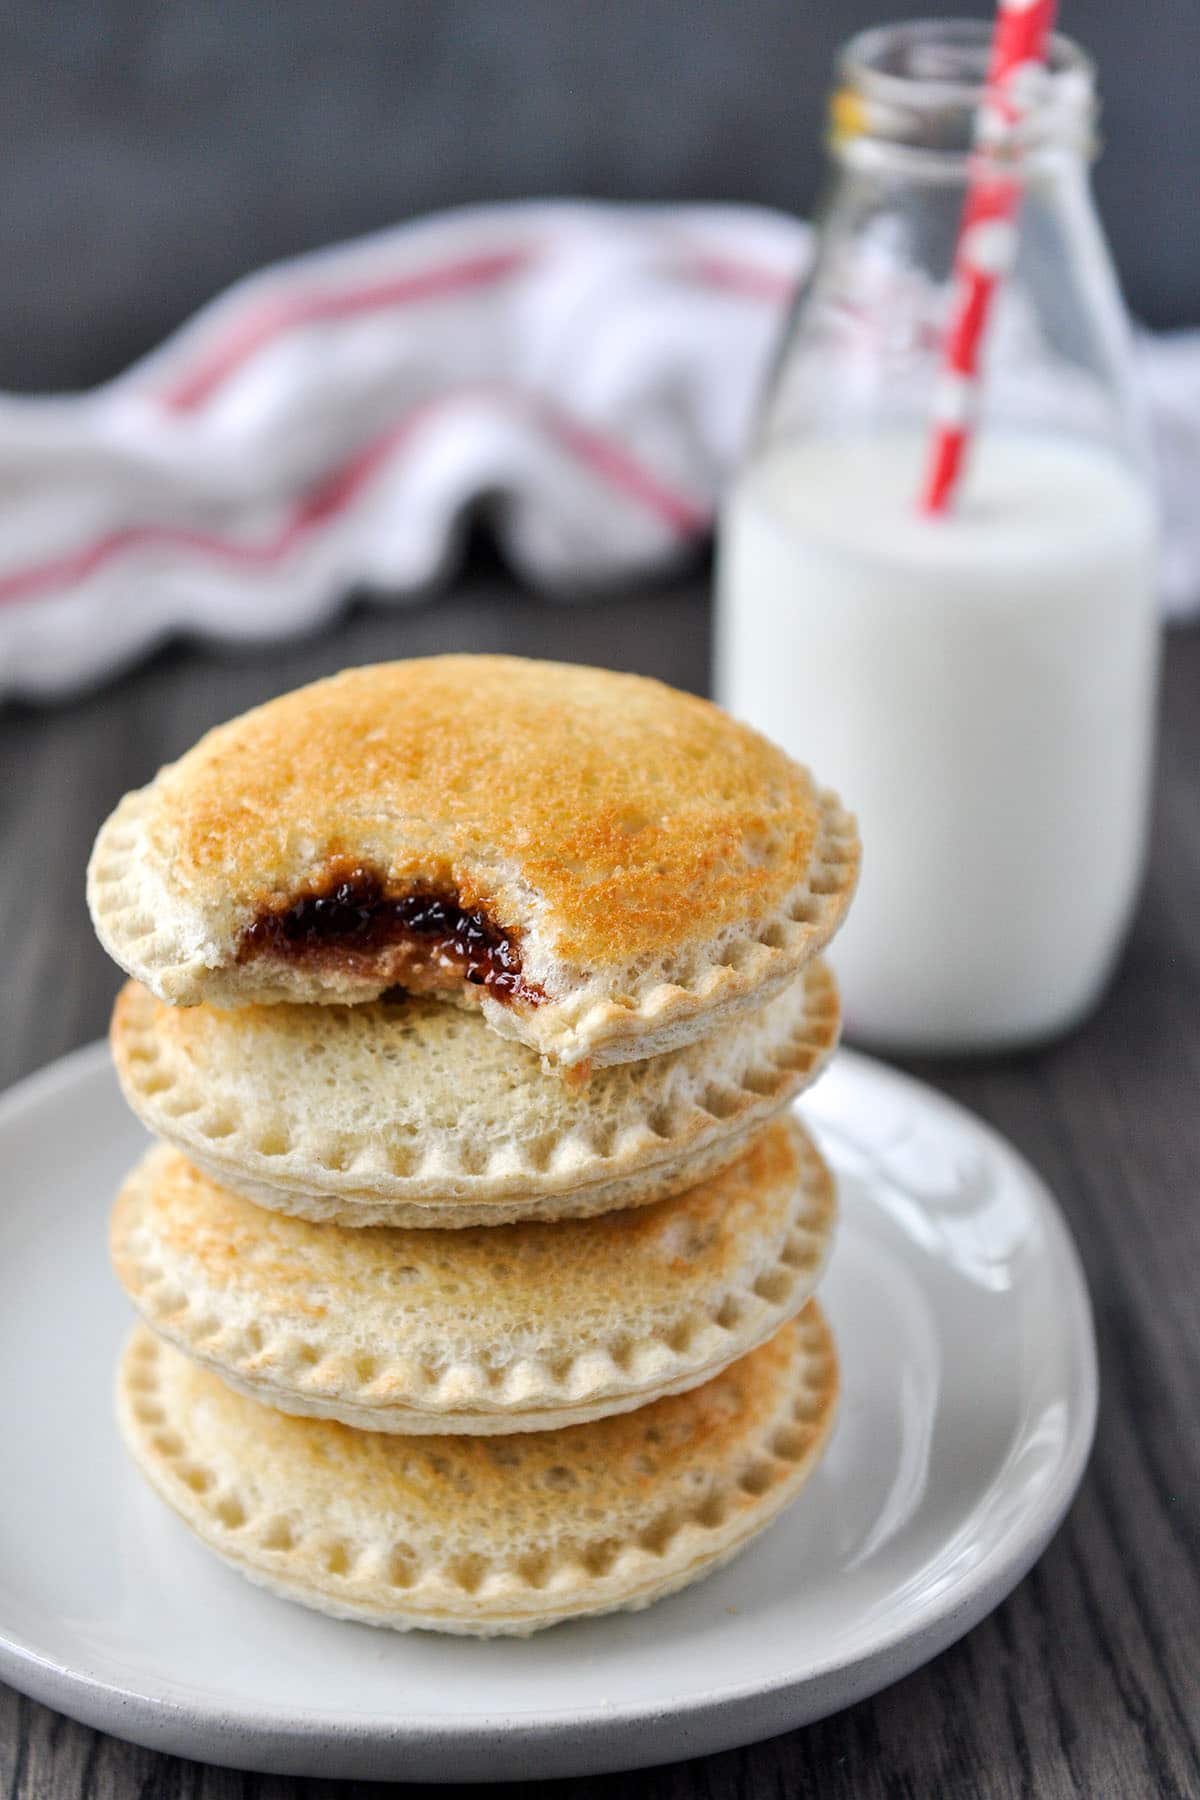 A stack of toasty Uncrustables on a plate, the top one is missing a bite and there is a glass bottle of milk and a white and red towel in the background.